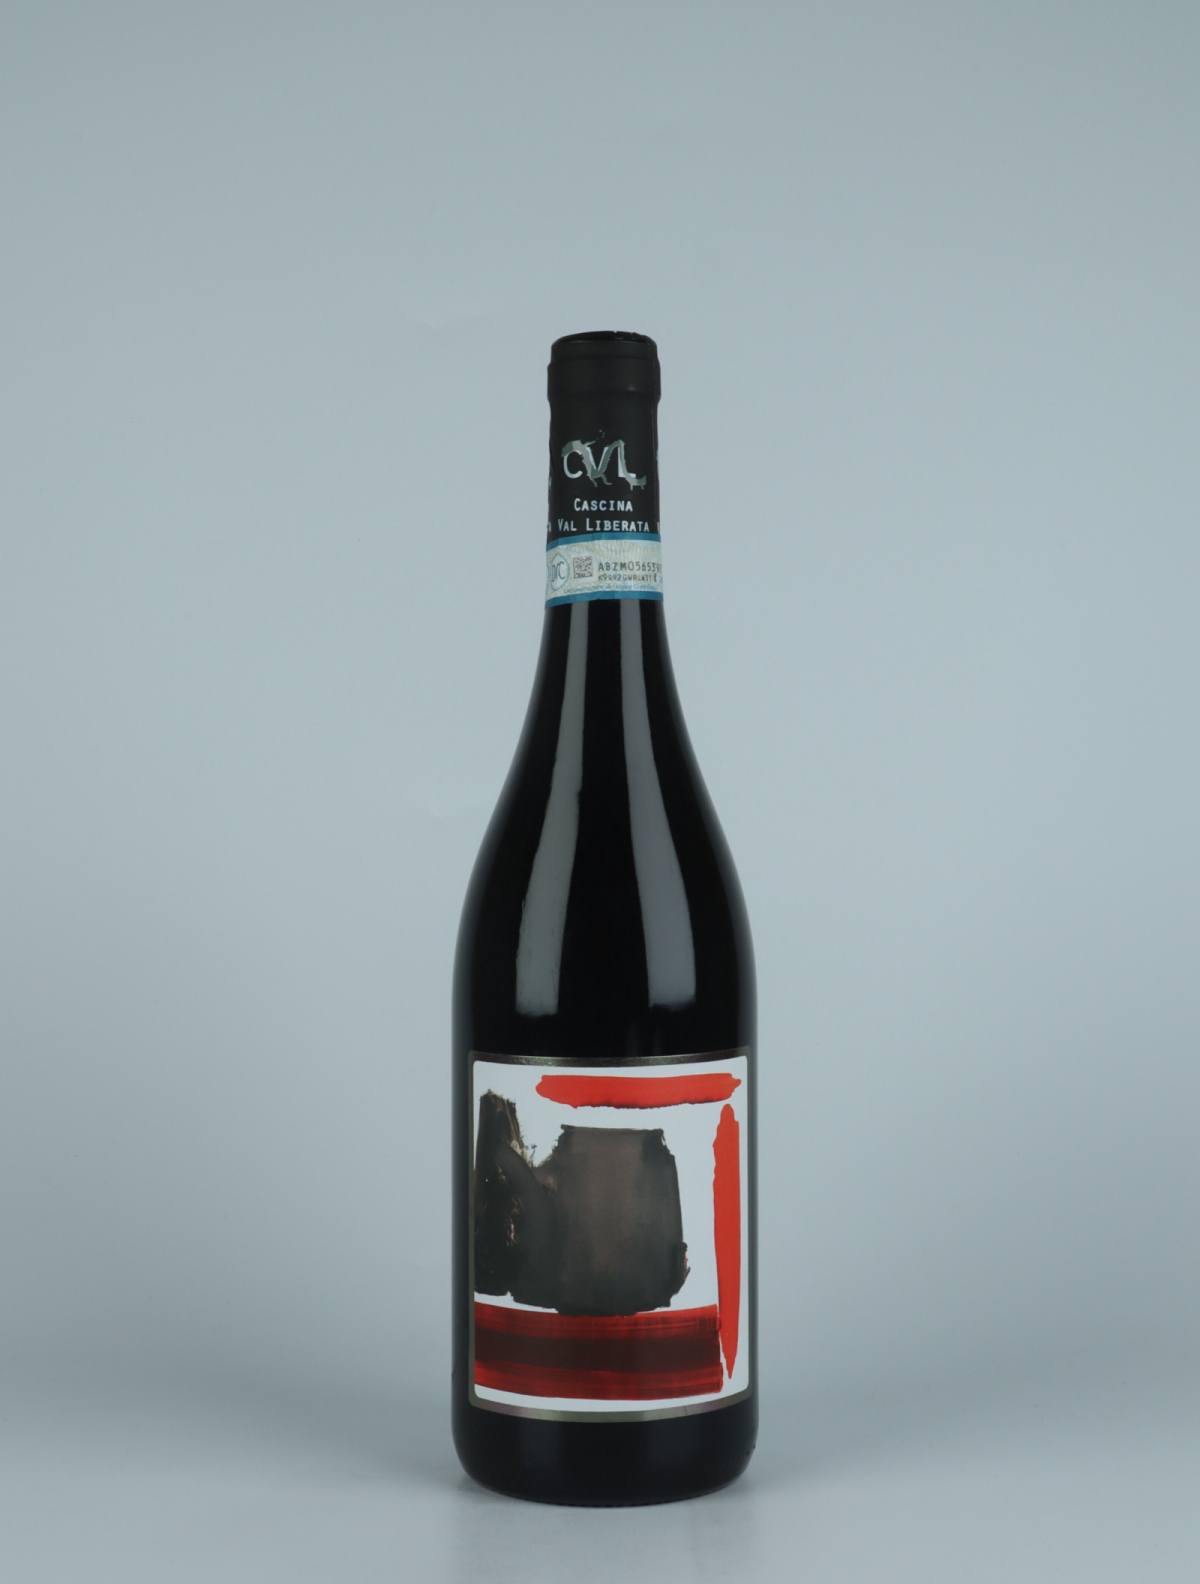 A bottle 2021 Cenerina Red wine from Cascina Val Liberata, Piedmont in Italy